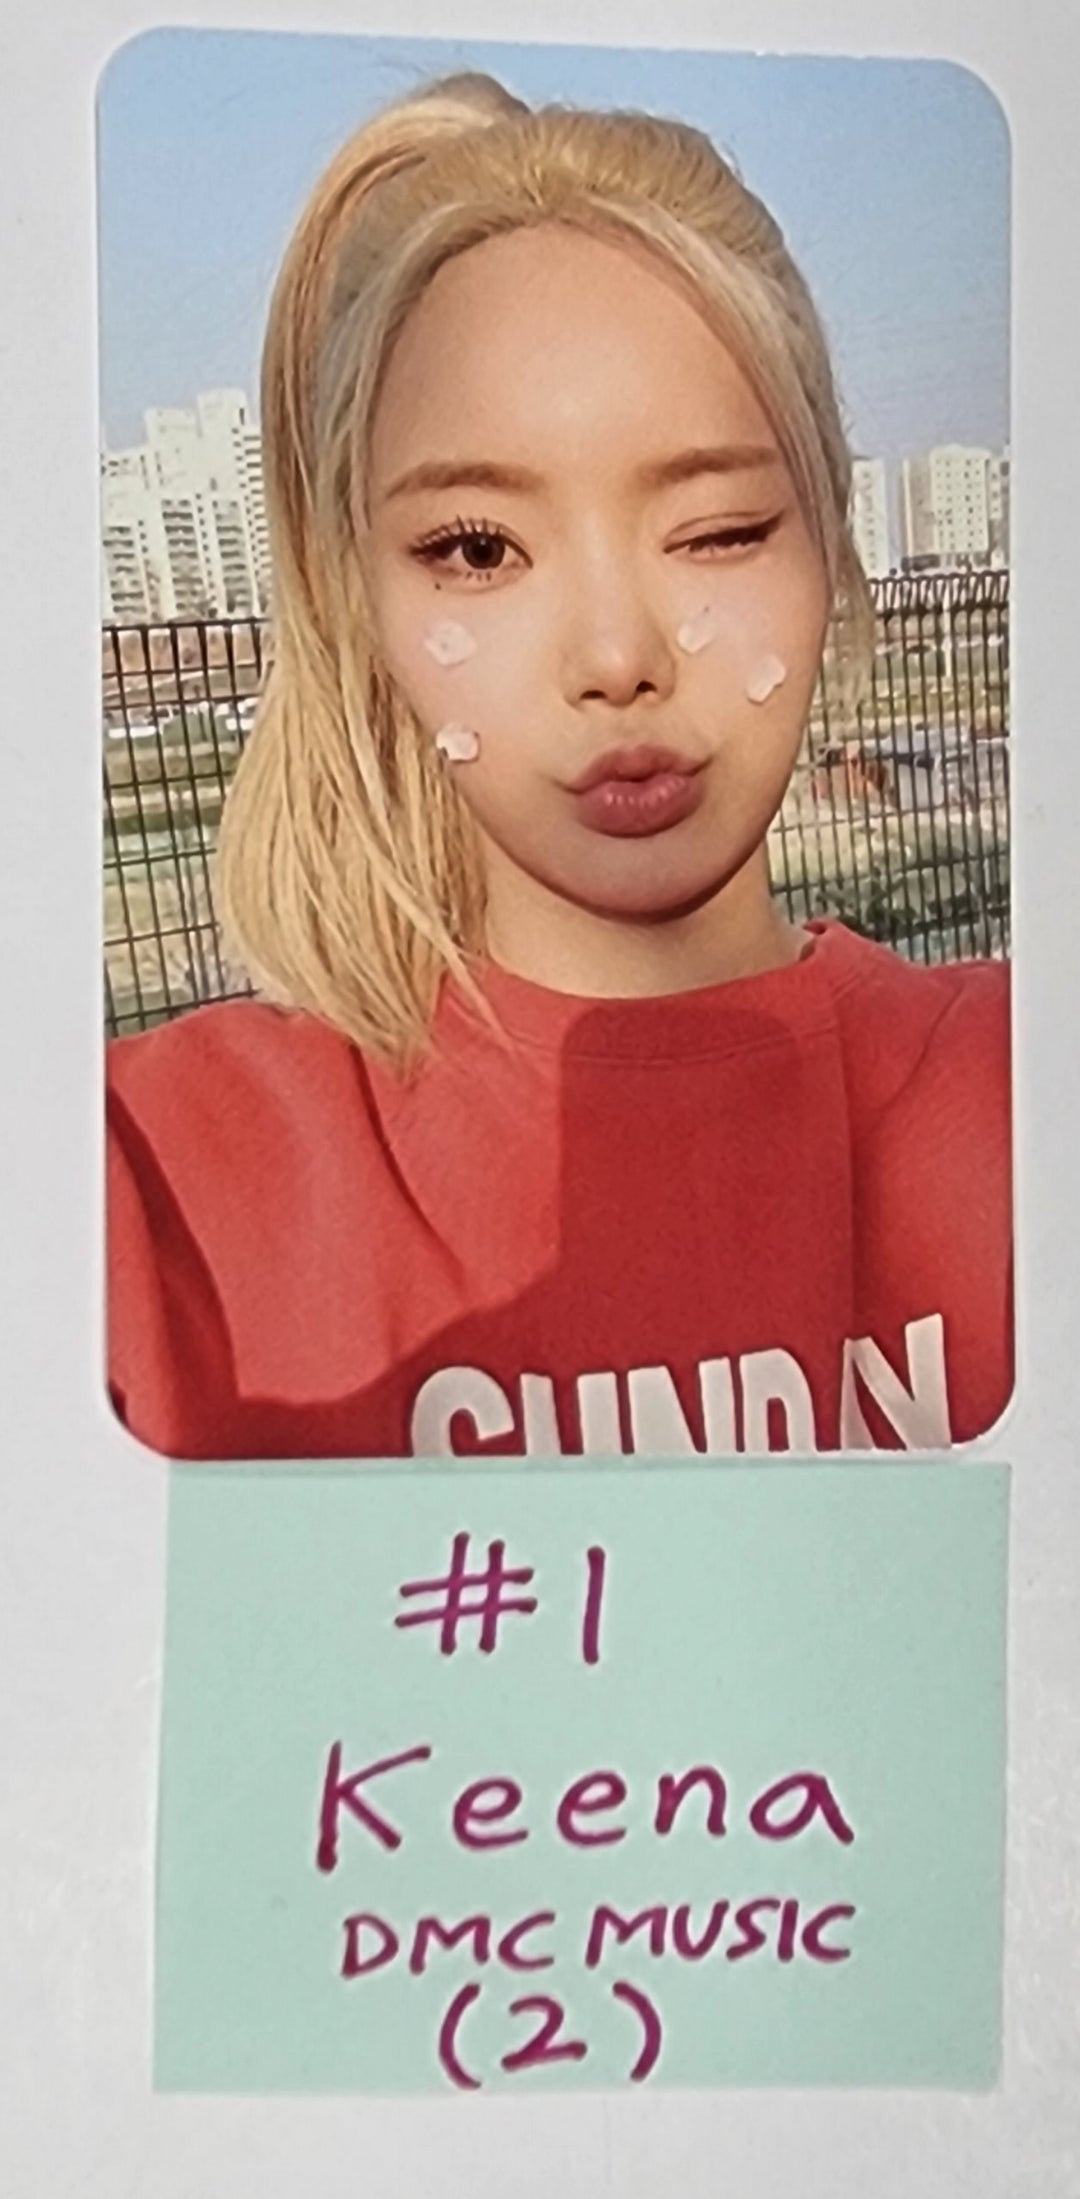 FIFTY FIFTY "The Beginning: Cupid" - DMC Music Fansign Event Photocard